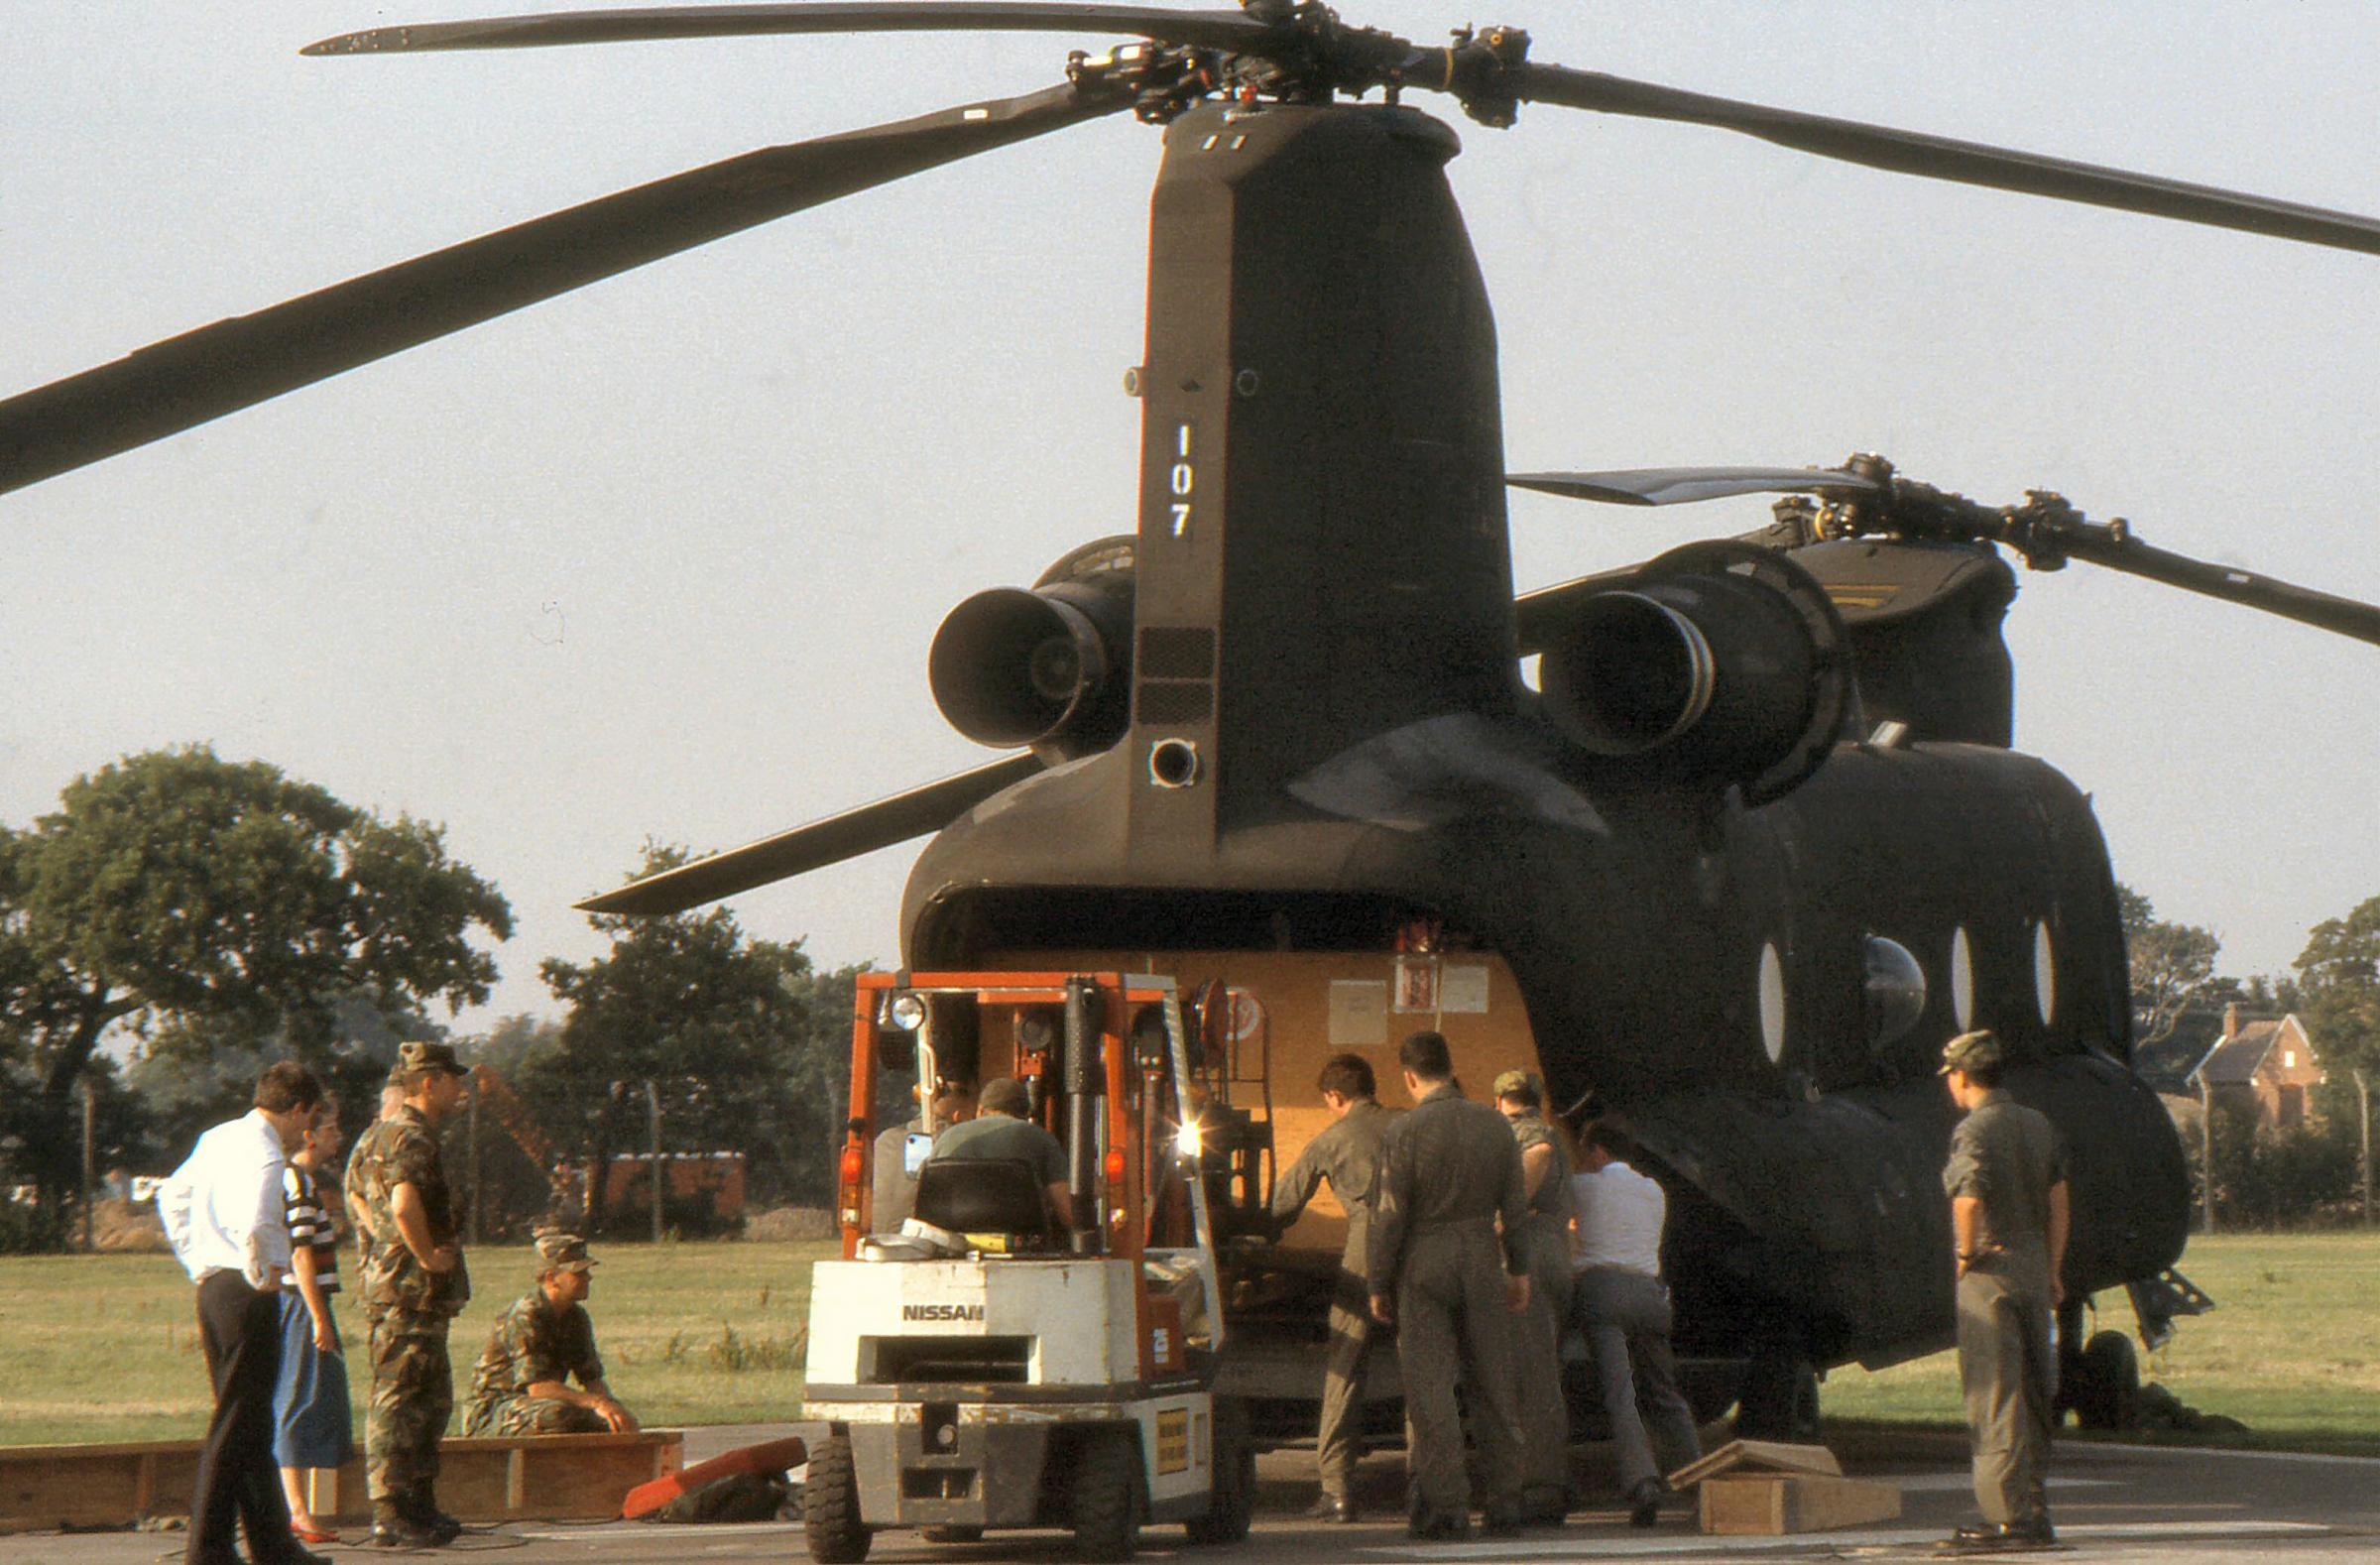 Supplies are loaded onto a Chinook helicopter to transport ultimitely to assist the First Gulf War effort